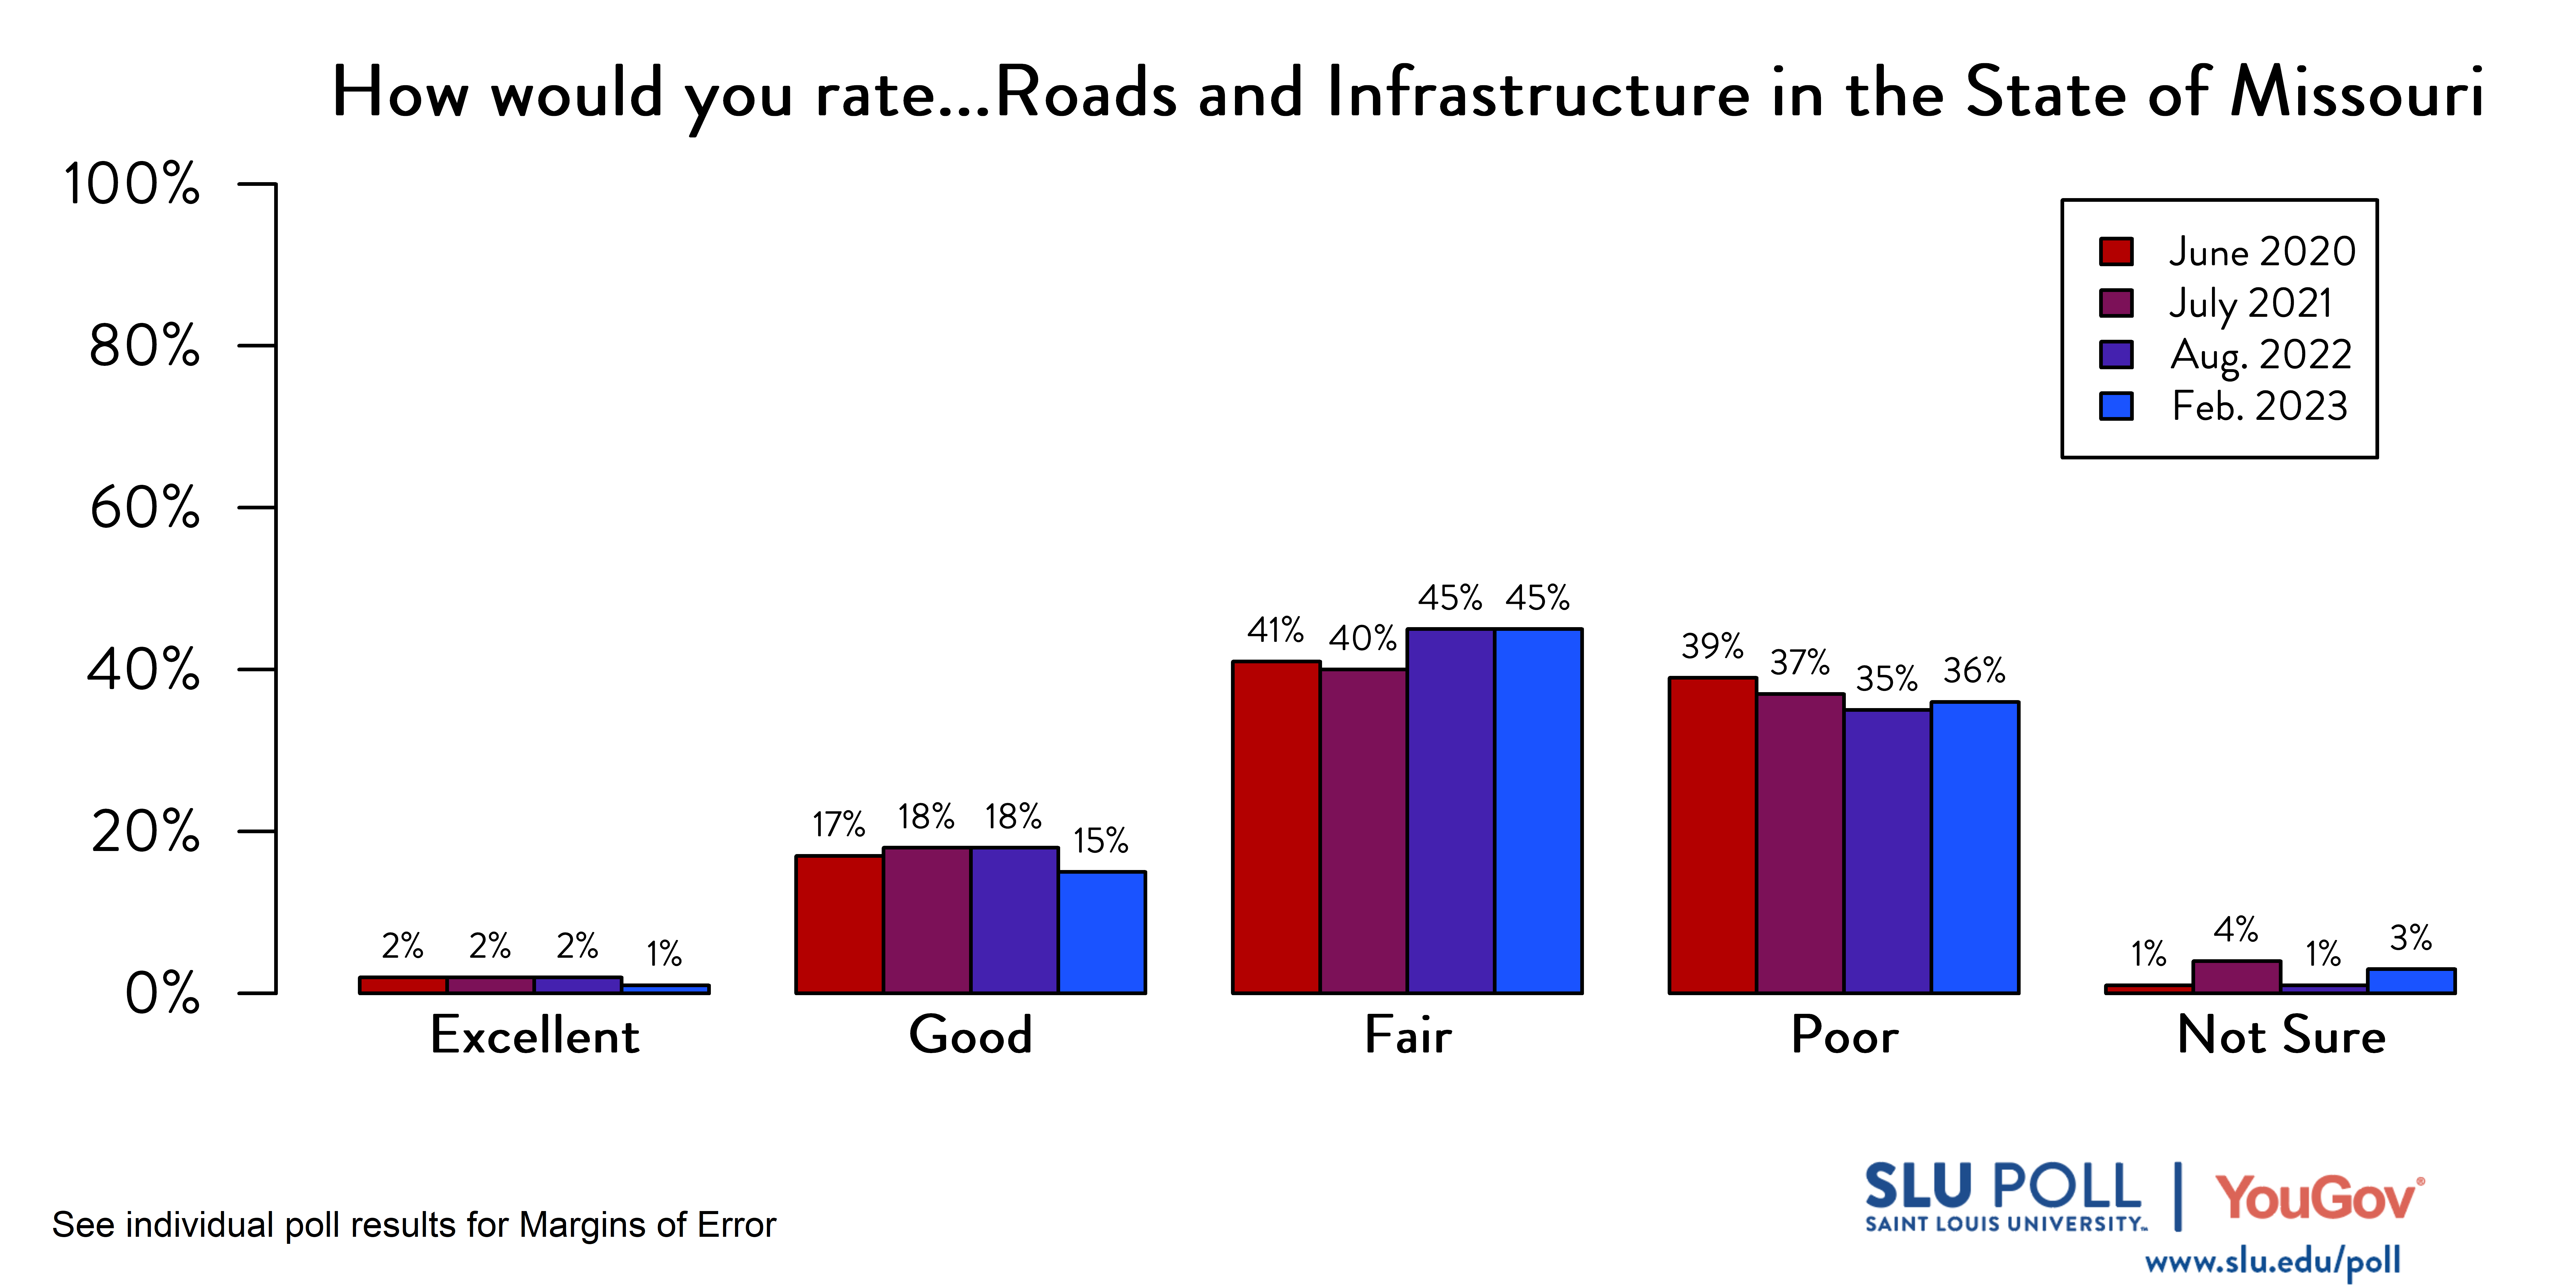 Likely voters' responses to 'How would you rate the following: Roads and infrastructure in the State of Missouri?': February 2023 Responses: 1% Excellent, 15% Good, 45% Fair, 36% Poor, and 3% Not sure. August 2022 Responses: 2% Excellent, 18% Good, 45% Fair, 35% Poor, and 1% Not sure. July 2021 Responses: 2% Excellent, 18% Good, 40% Fair, 37% Poor, and 4% Not sure. June 2020 Responses: 2% Excellent, 17% Good, 41% Fair, 39% Poor, and 1% Not sure.